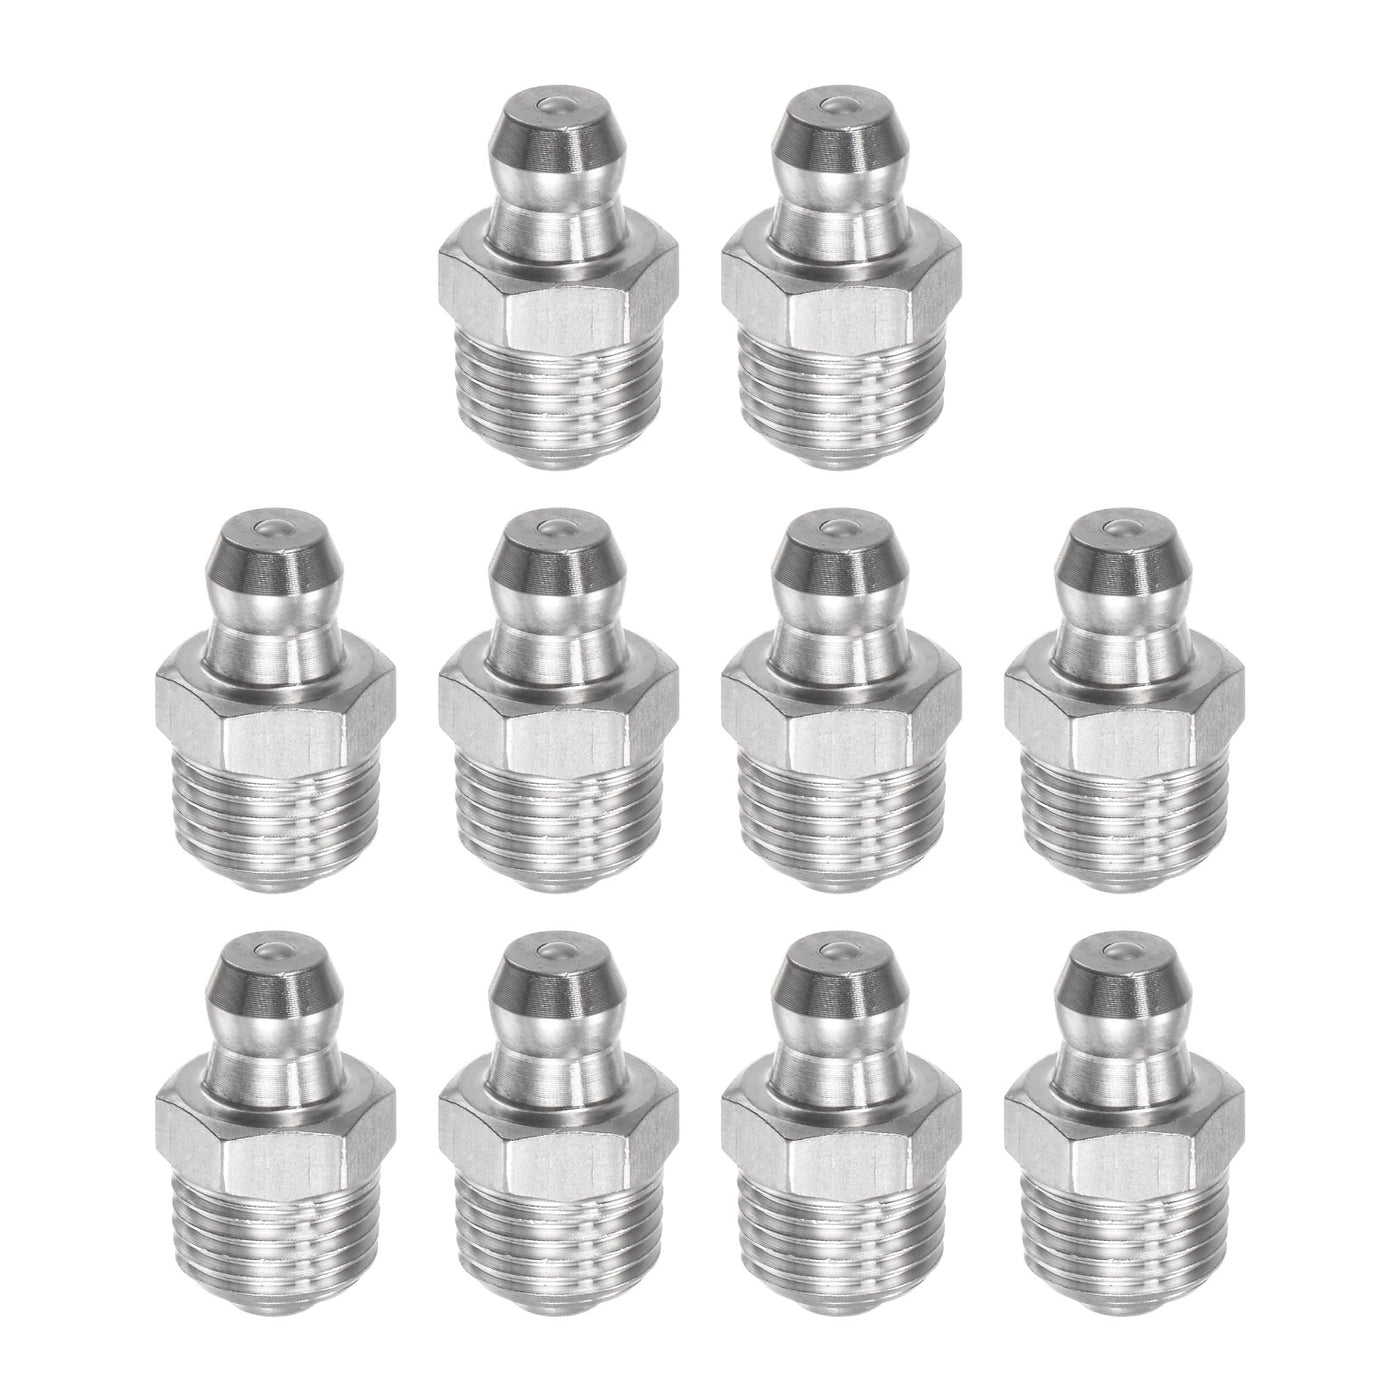 Uxcell Uxcell 201 Stainless Steel Straight Hydraulic Grease Fitting M8 x 1mm Thread, 10Pcs